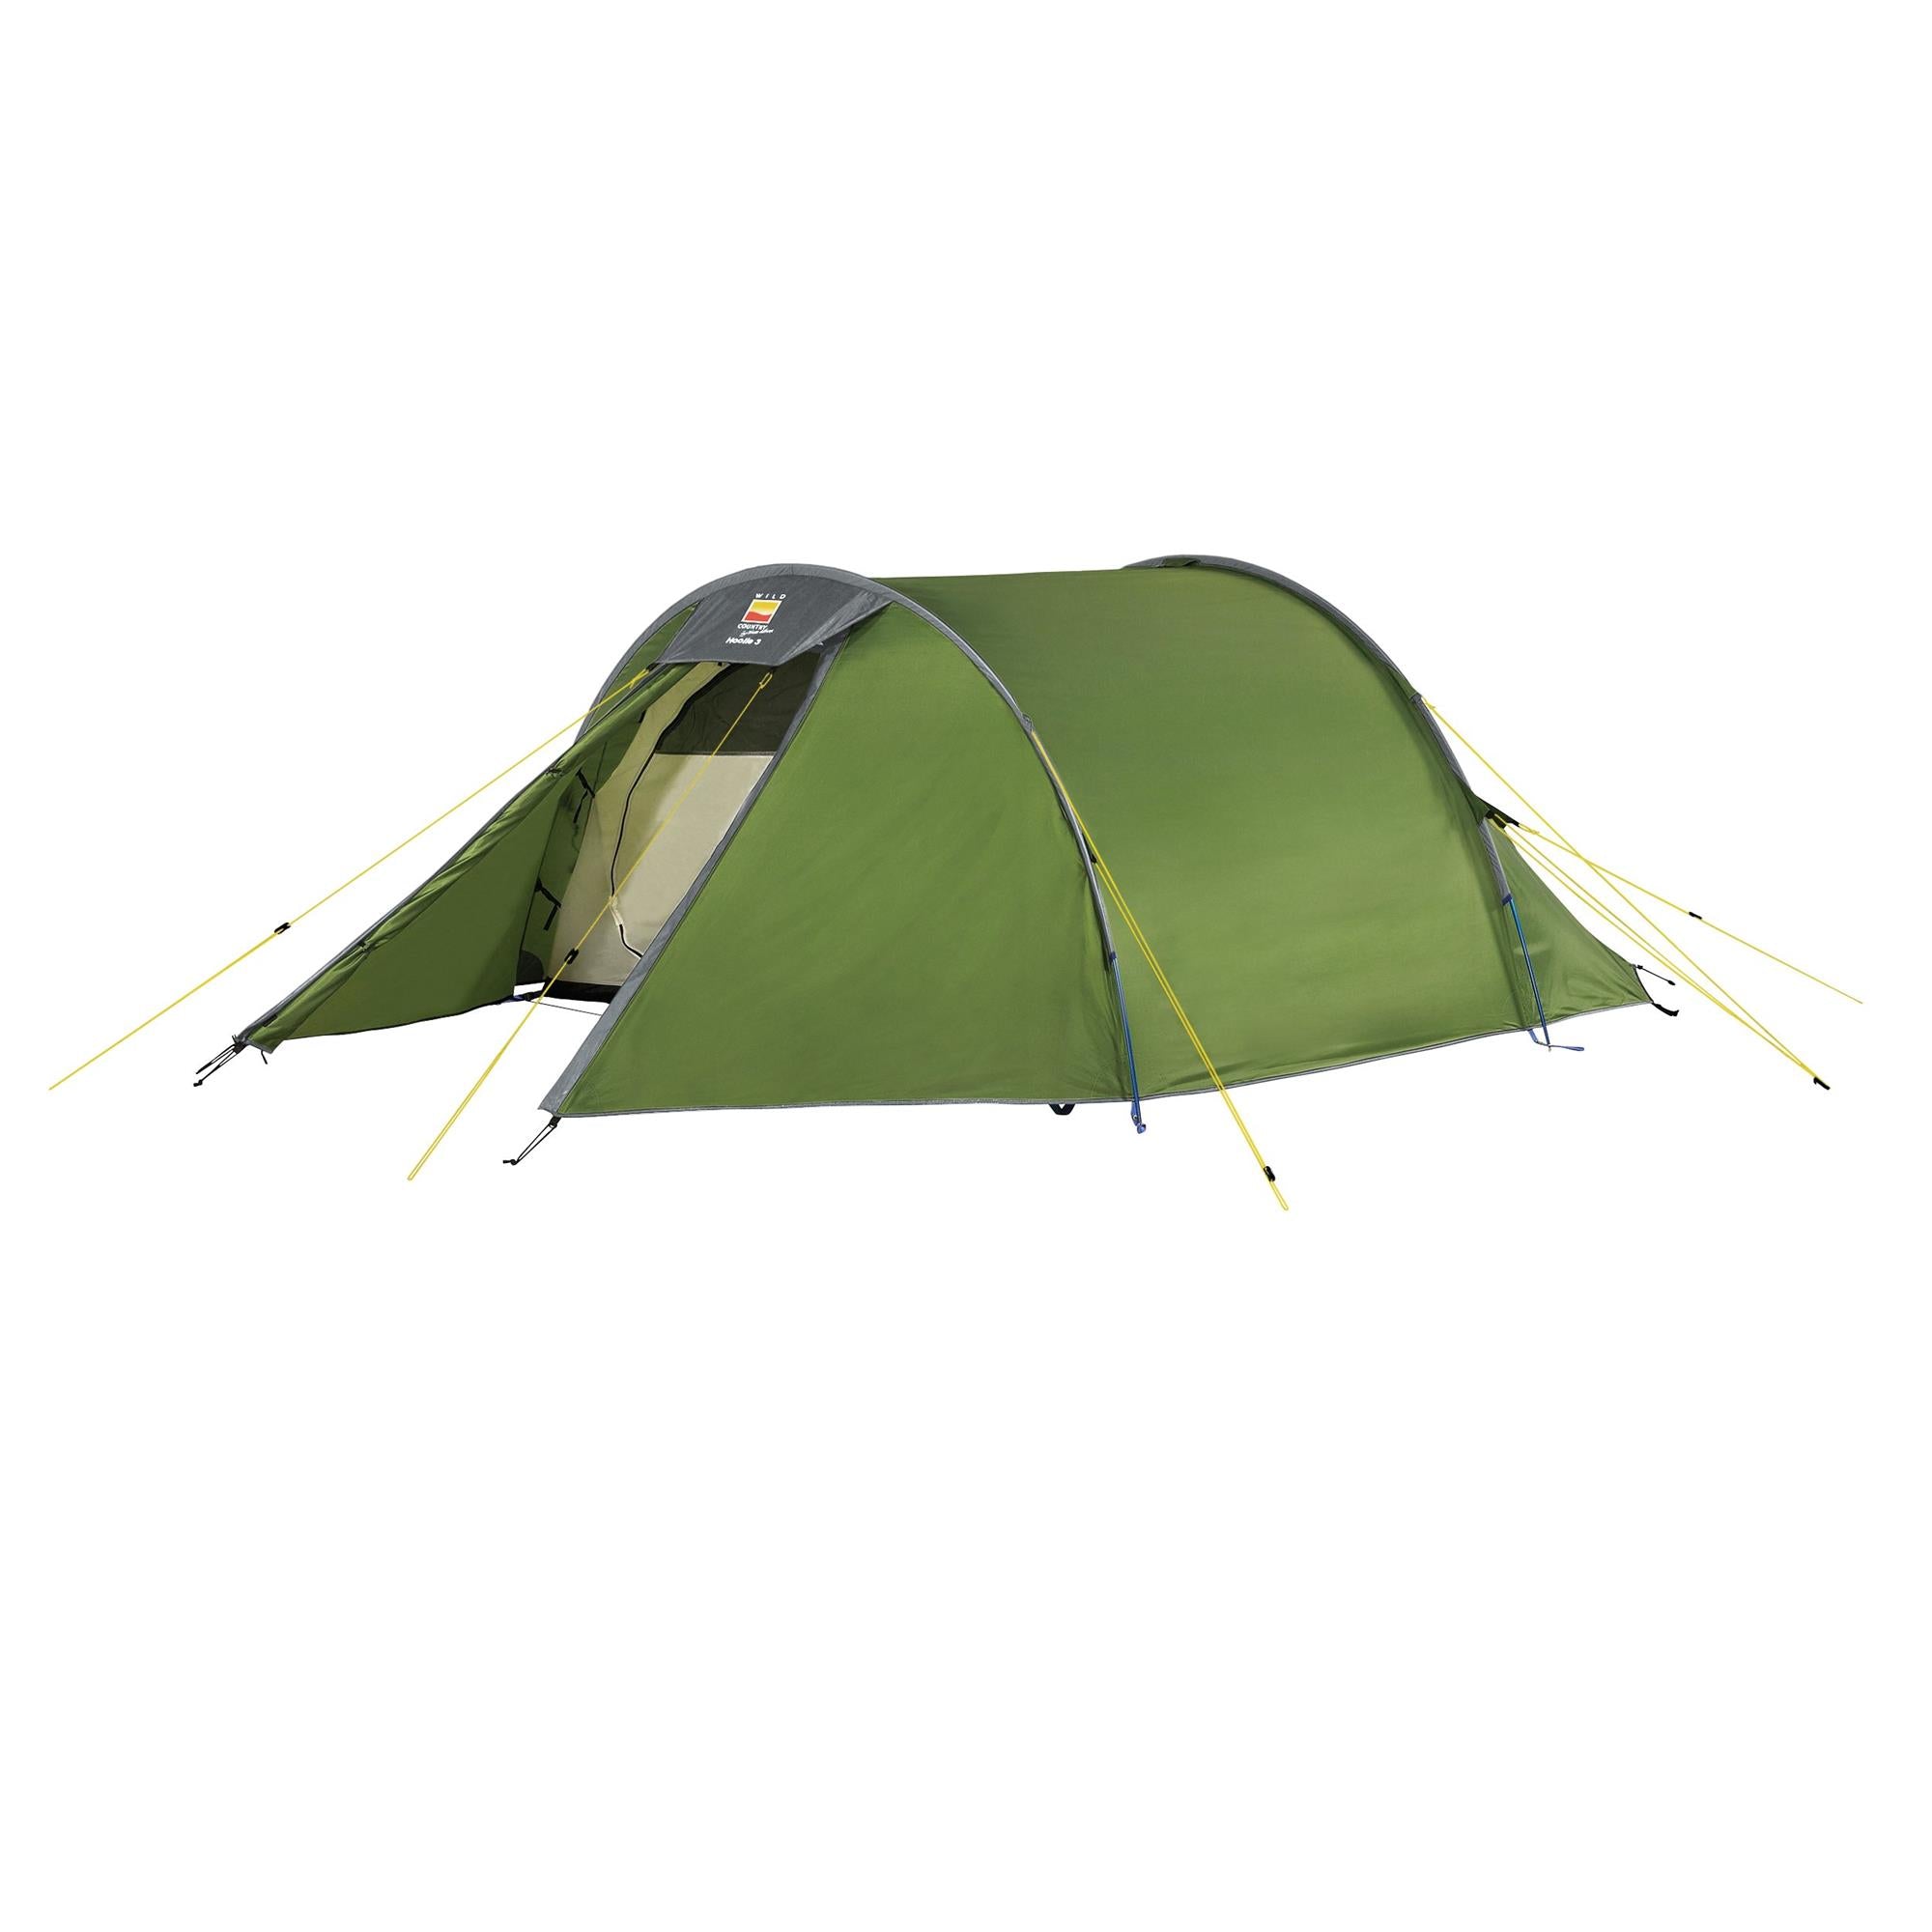 Wild Country Hoolie 3 Compact V3 Tent - 3 Man Tent